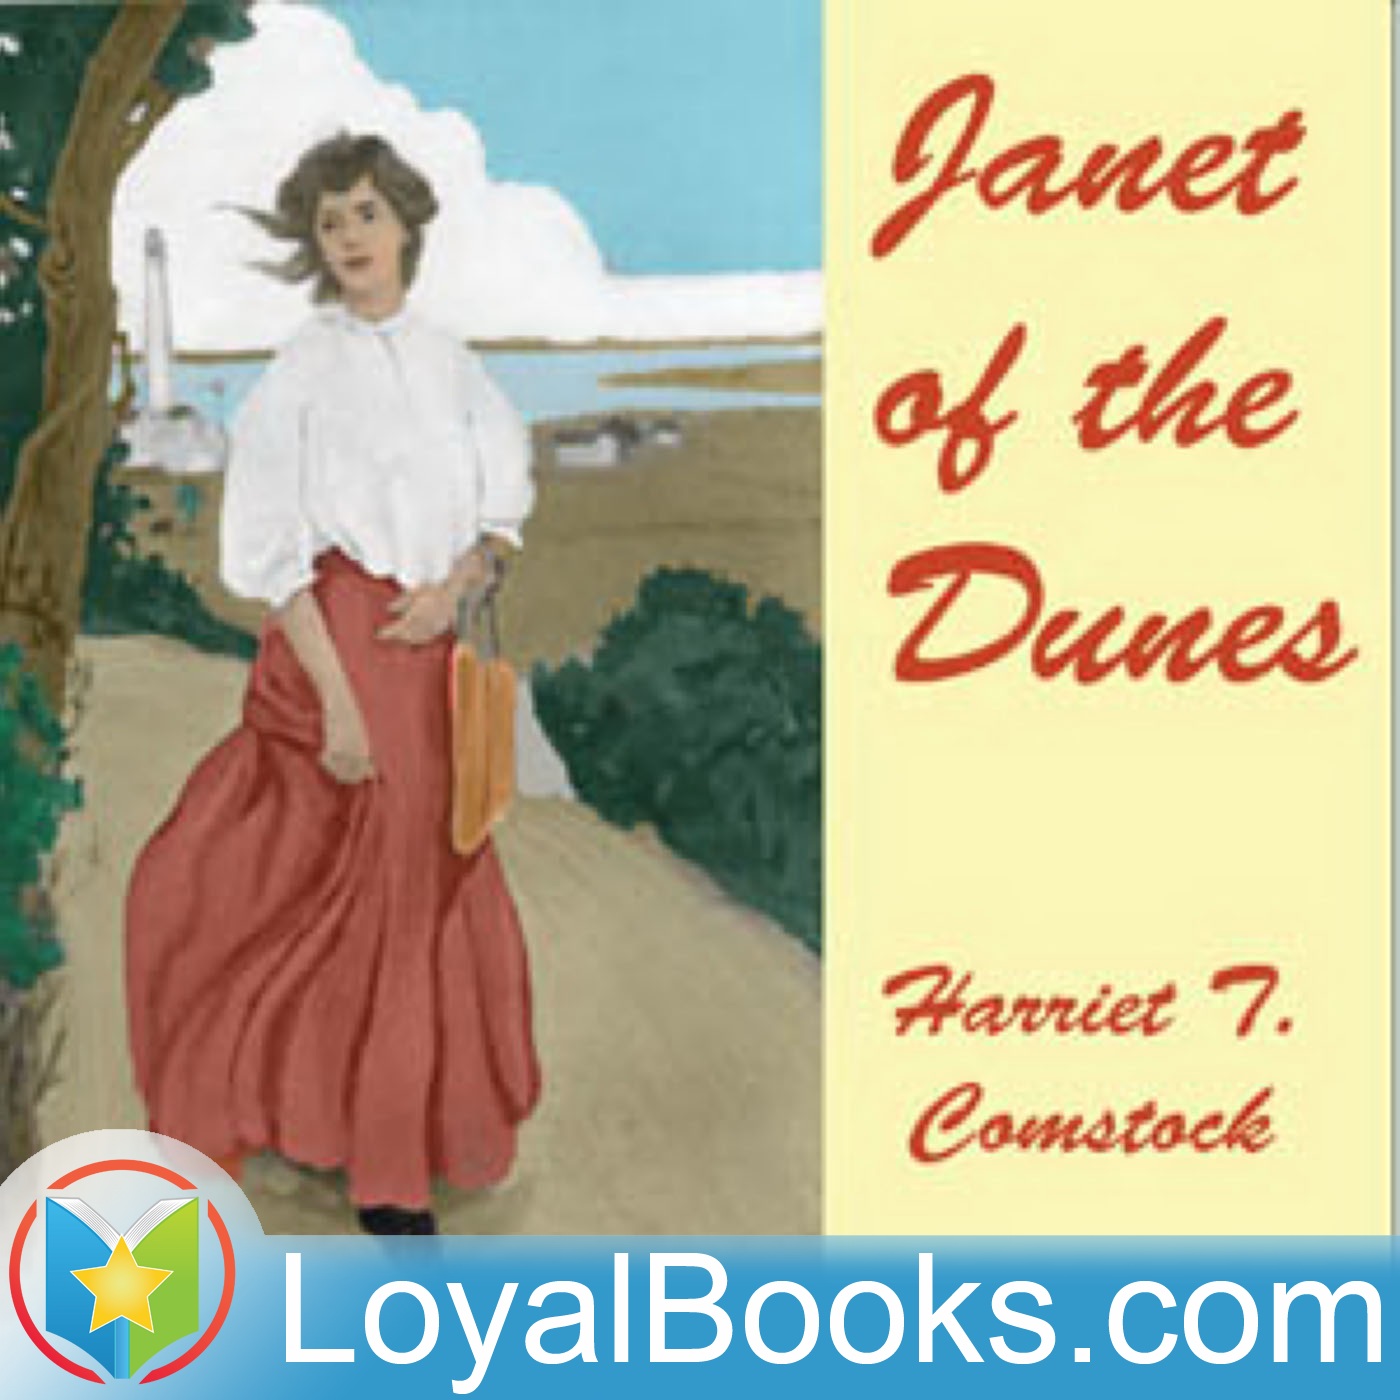 Janet of the Dunes by Harriet T. Comstock